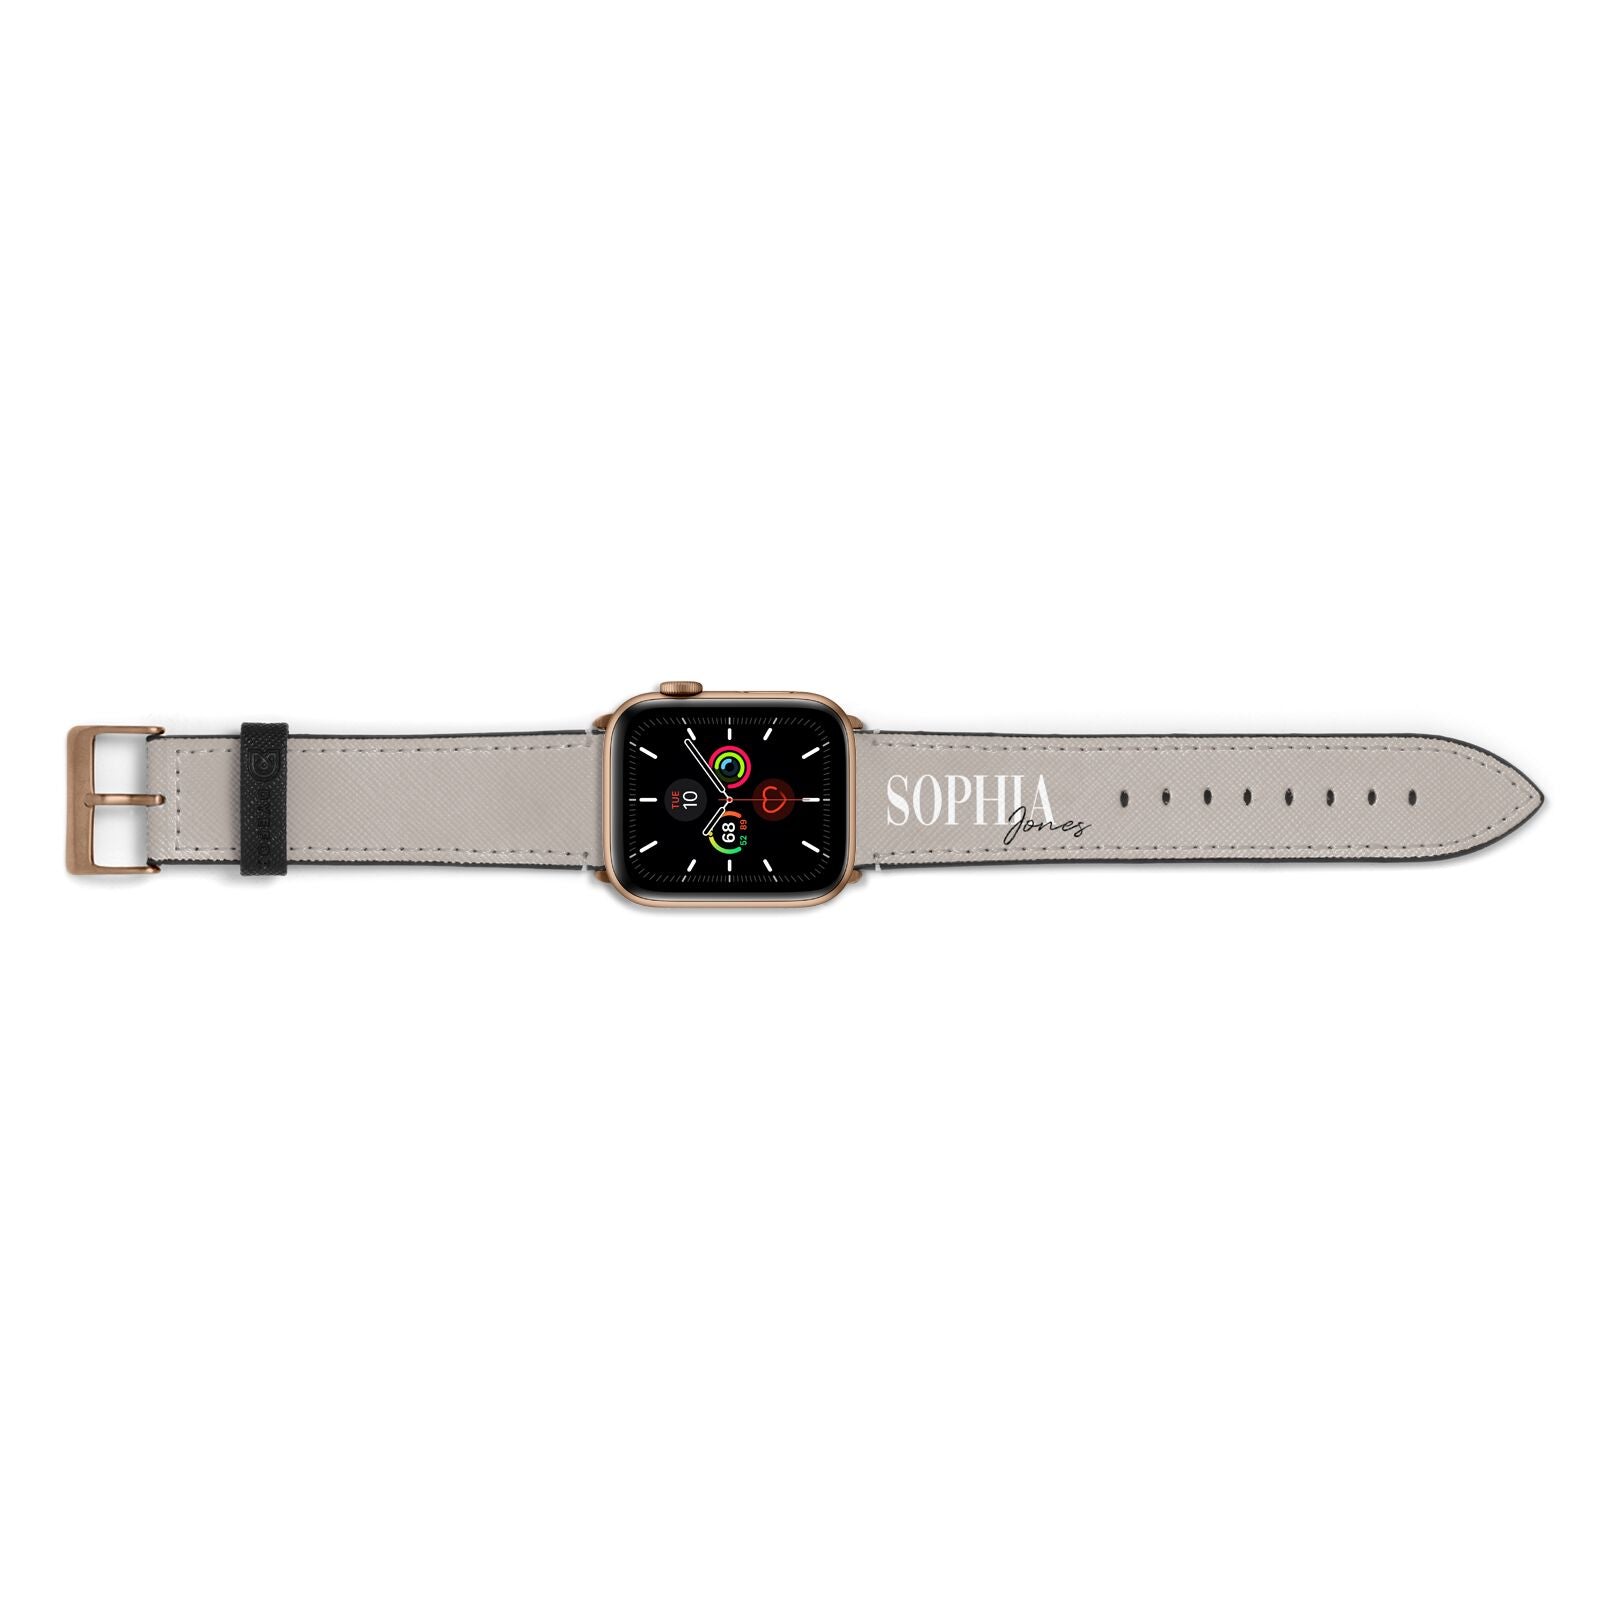 Stone Colour with Personalised Name Apple Watch Strap Landscape Image Gold Hardware